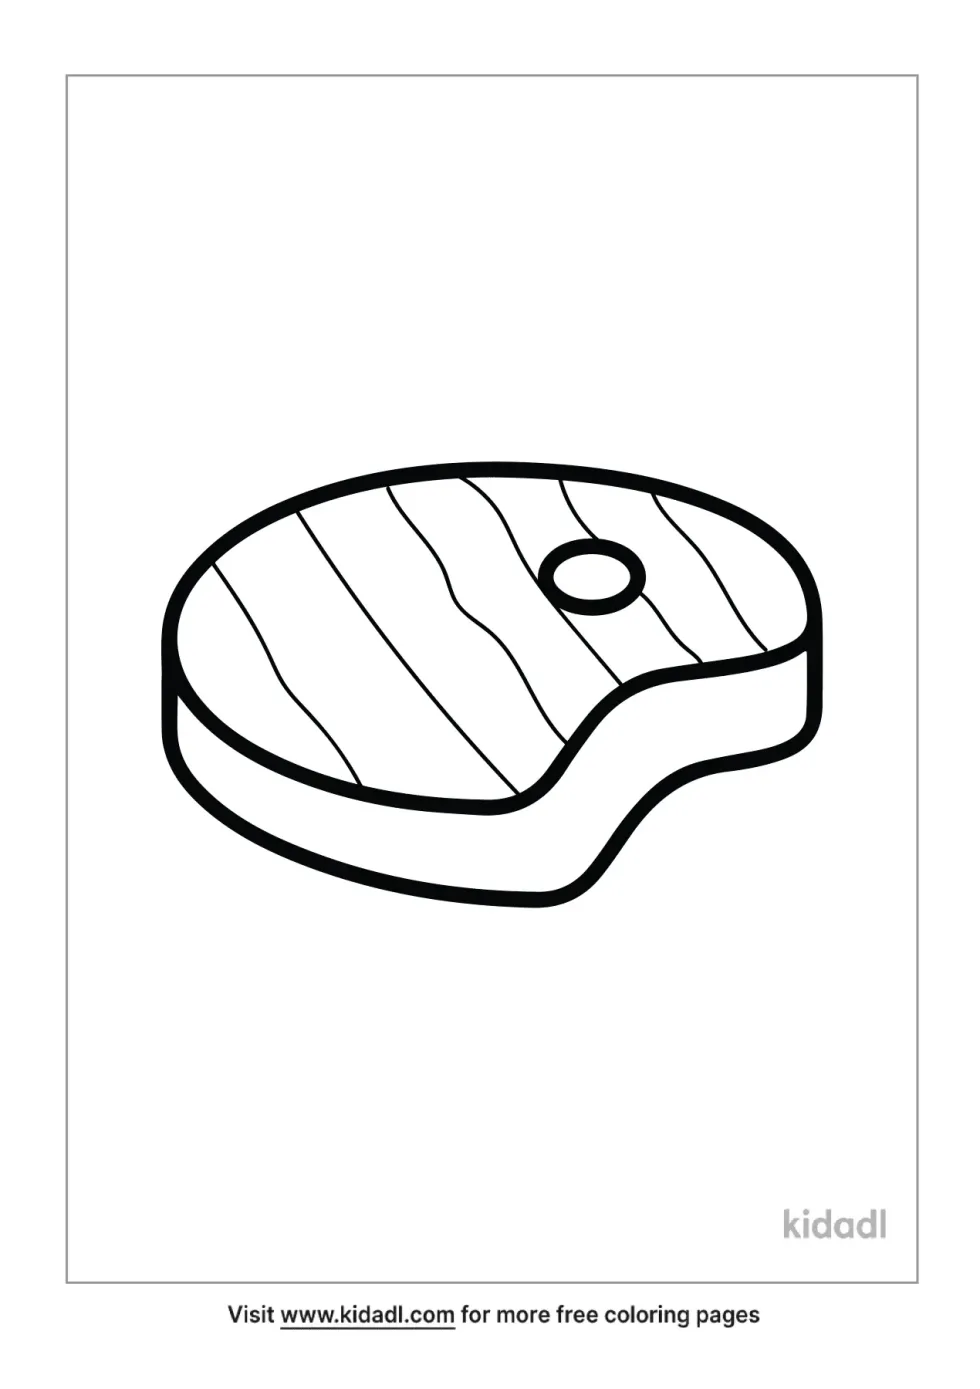 Steak Coloring Page